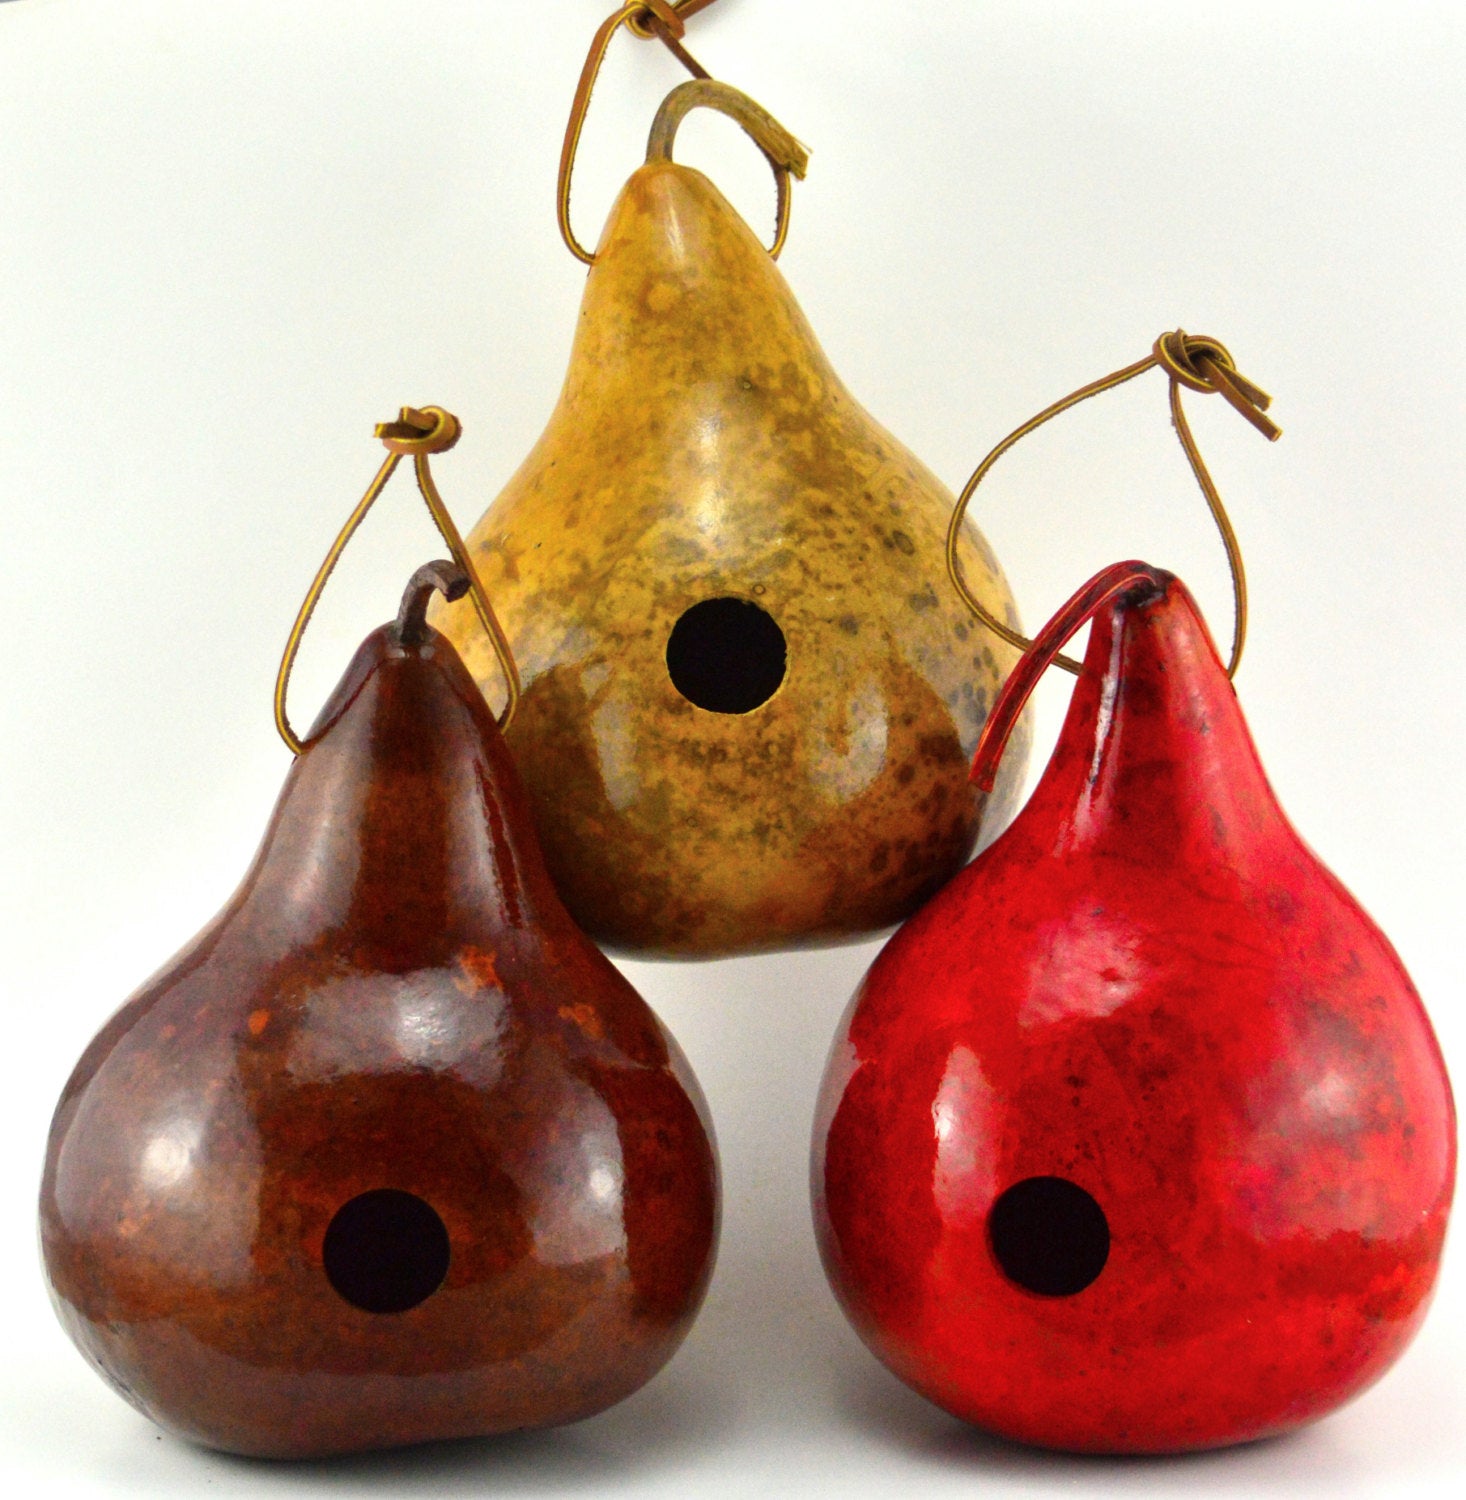 Gourd Birdhouses Painted Gourd Art Garden Art Bird Lovers Gift or Fathers Day Gift - 3 Gourd Combo - Gourdaments